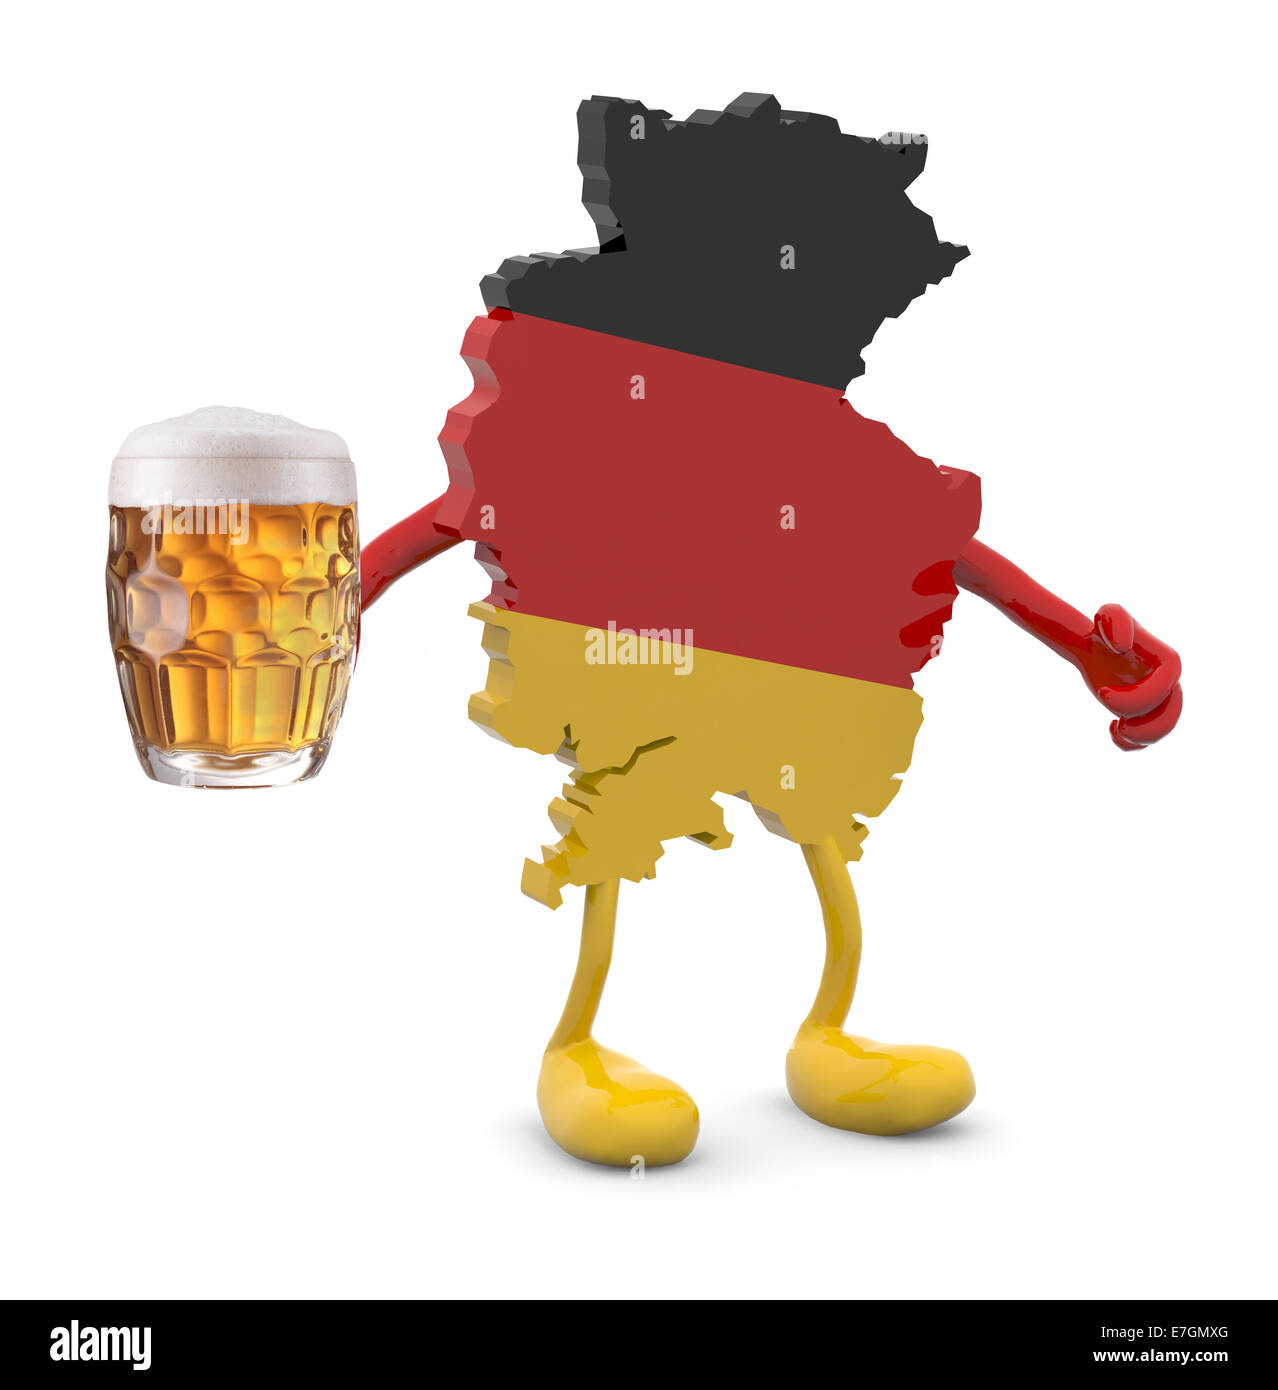 germany map with arms, legs and glass mug of beer on hand, 3d illustration Stock Photo